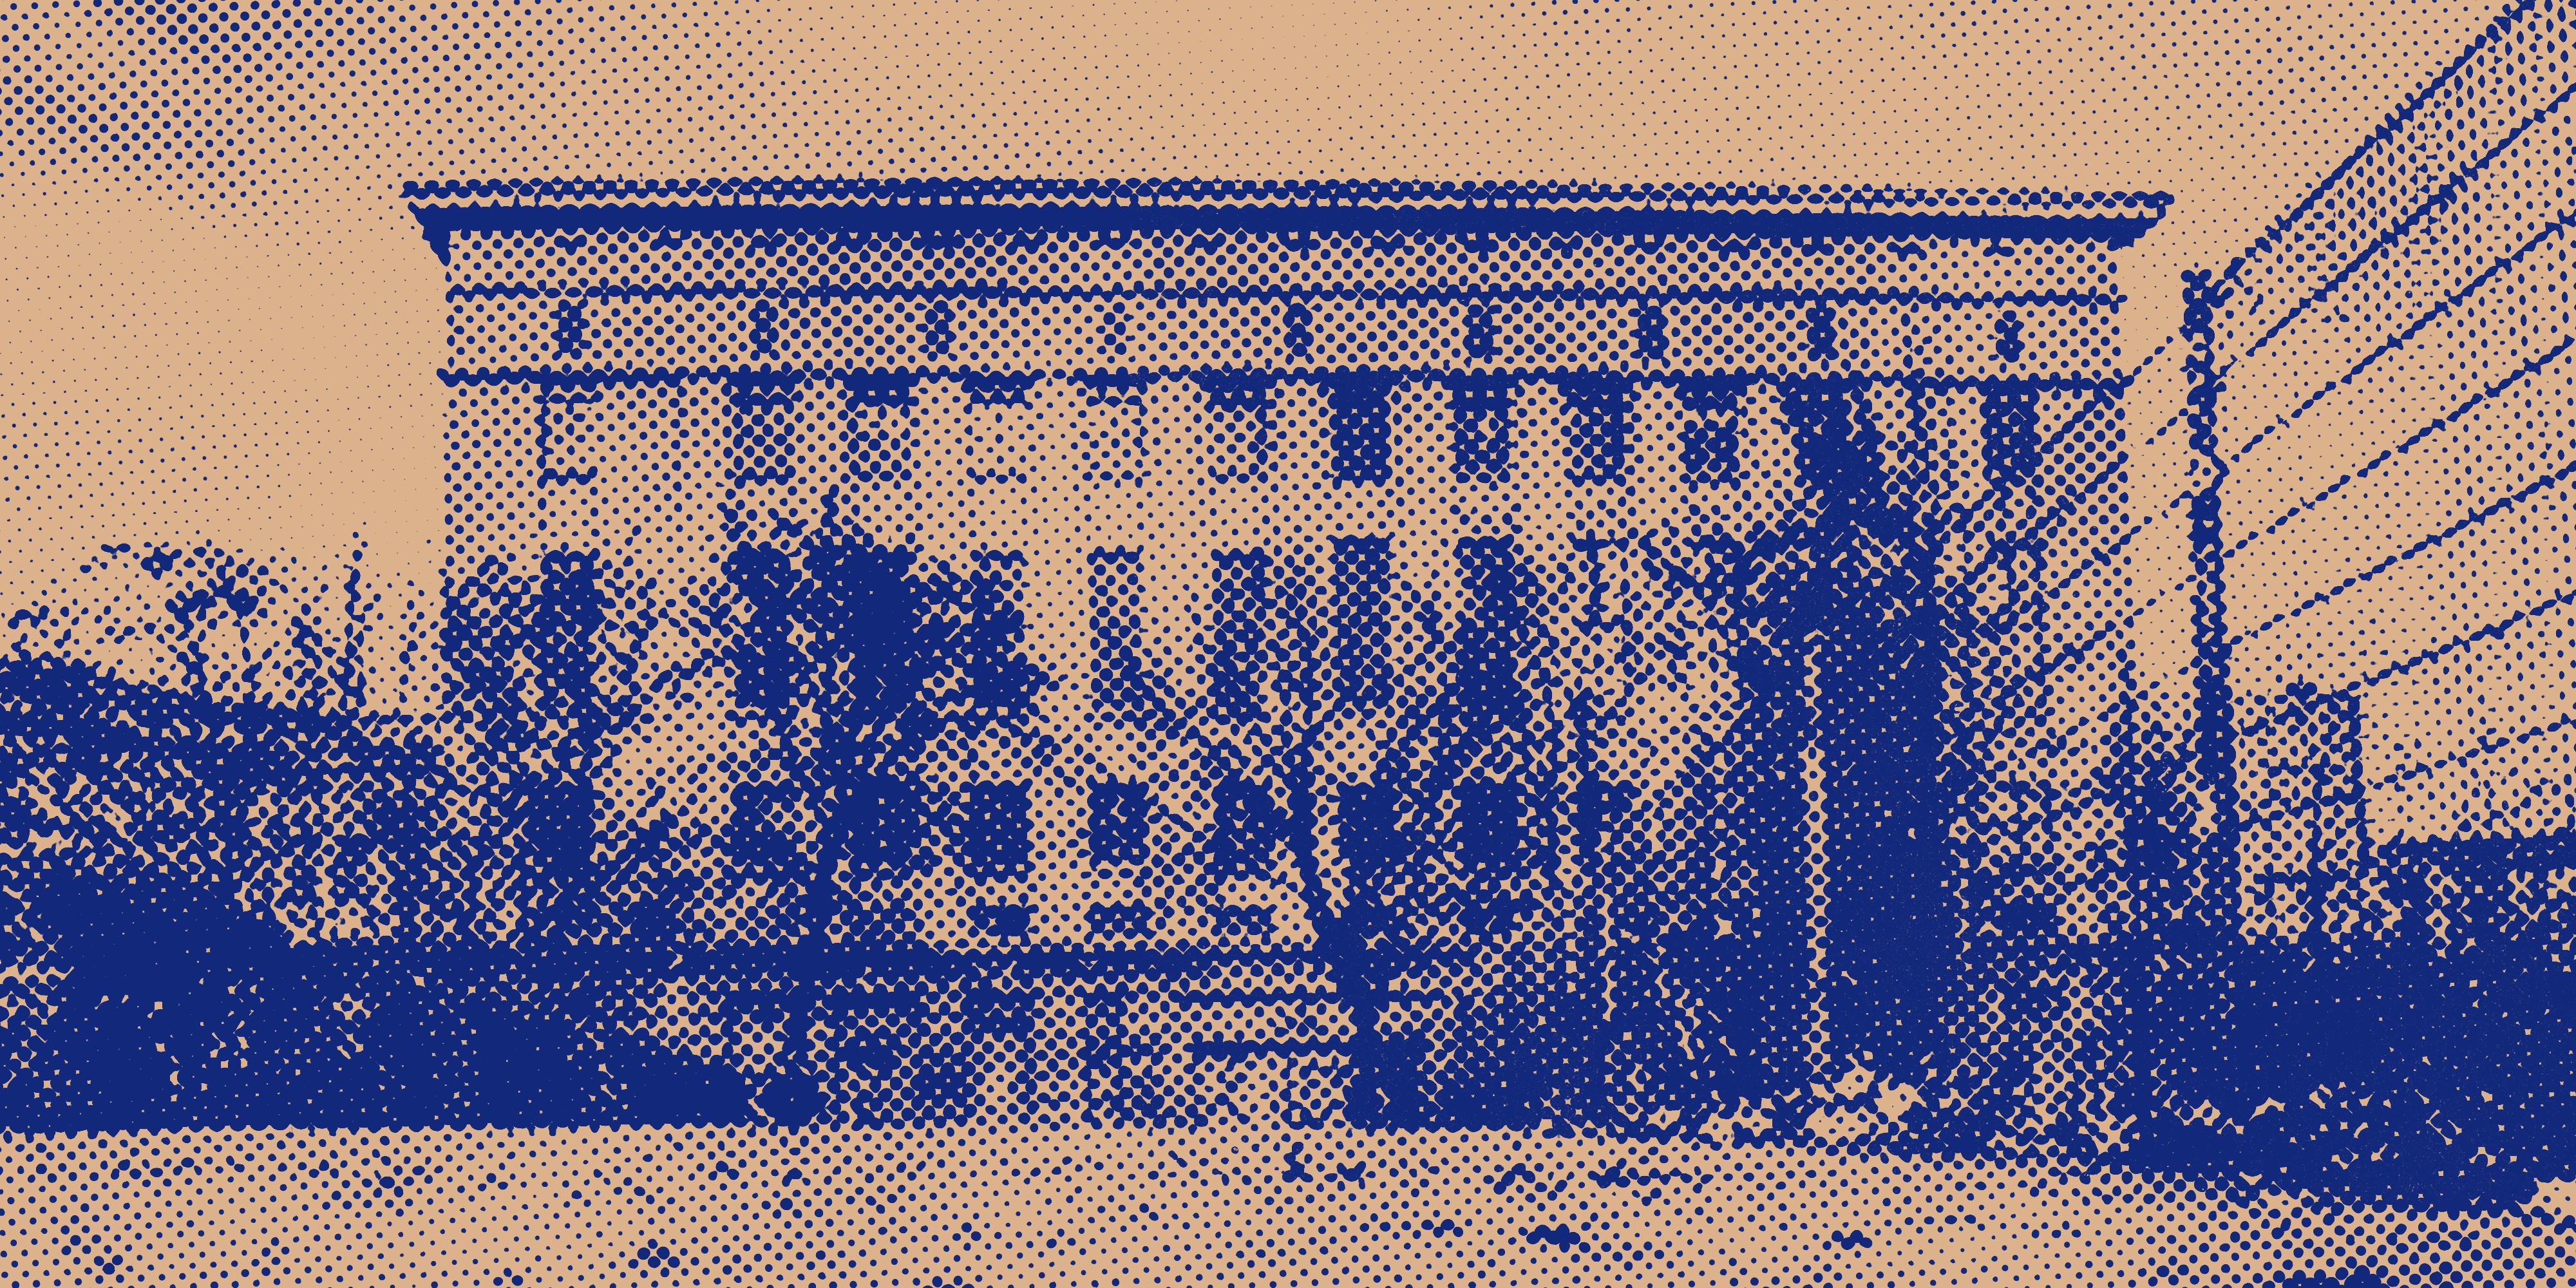 Berghain and the long tail of timeless techno